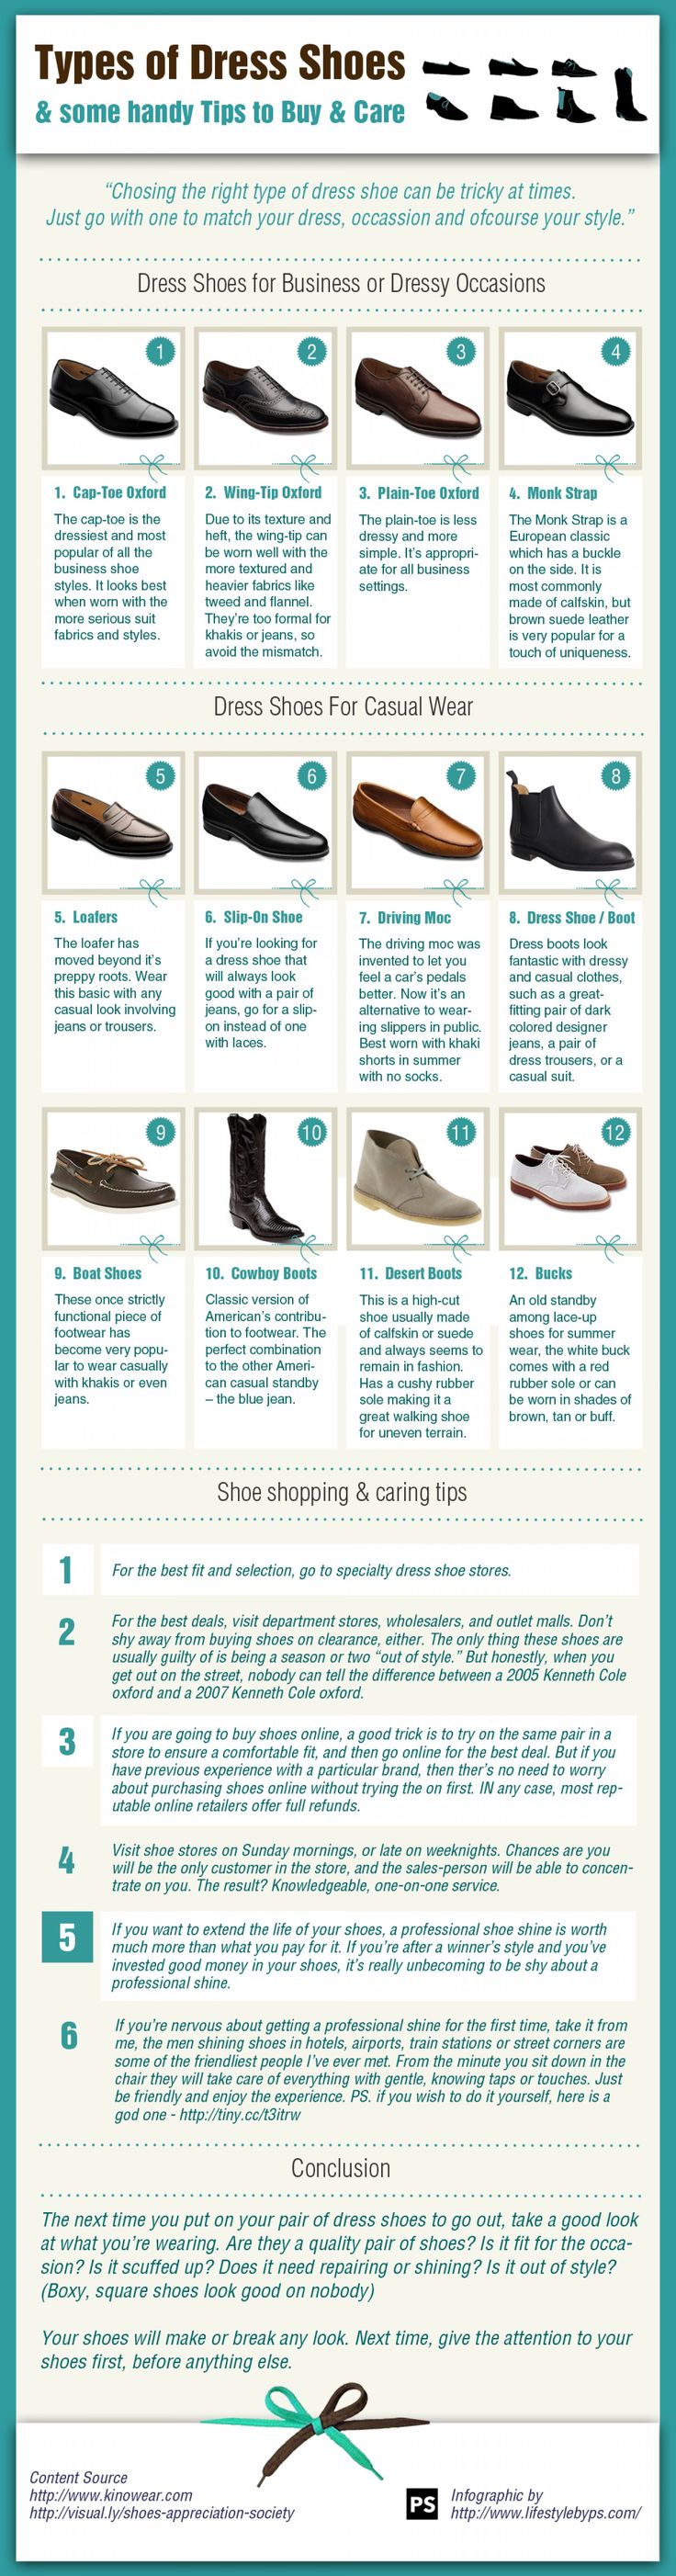 Fashion infographic : Types of Dress Shoes | Visual.ly - InfographicNow ...